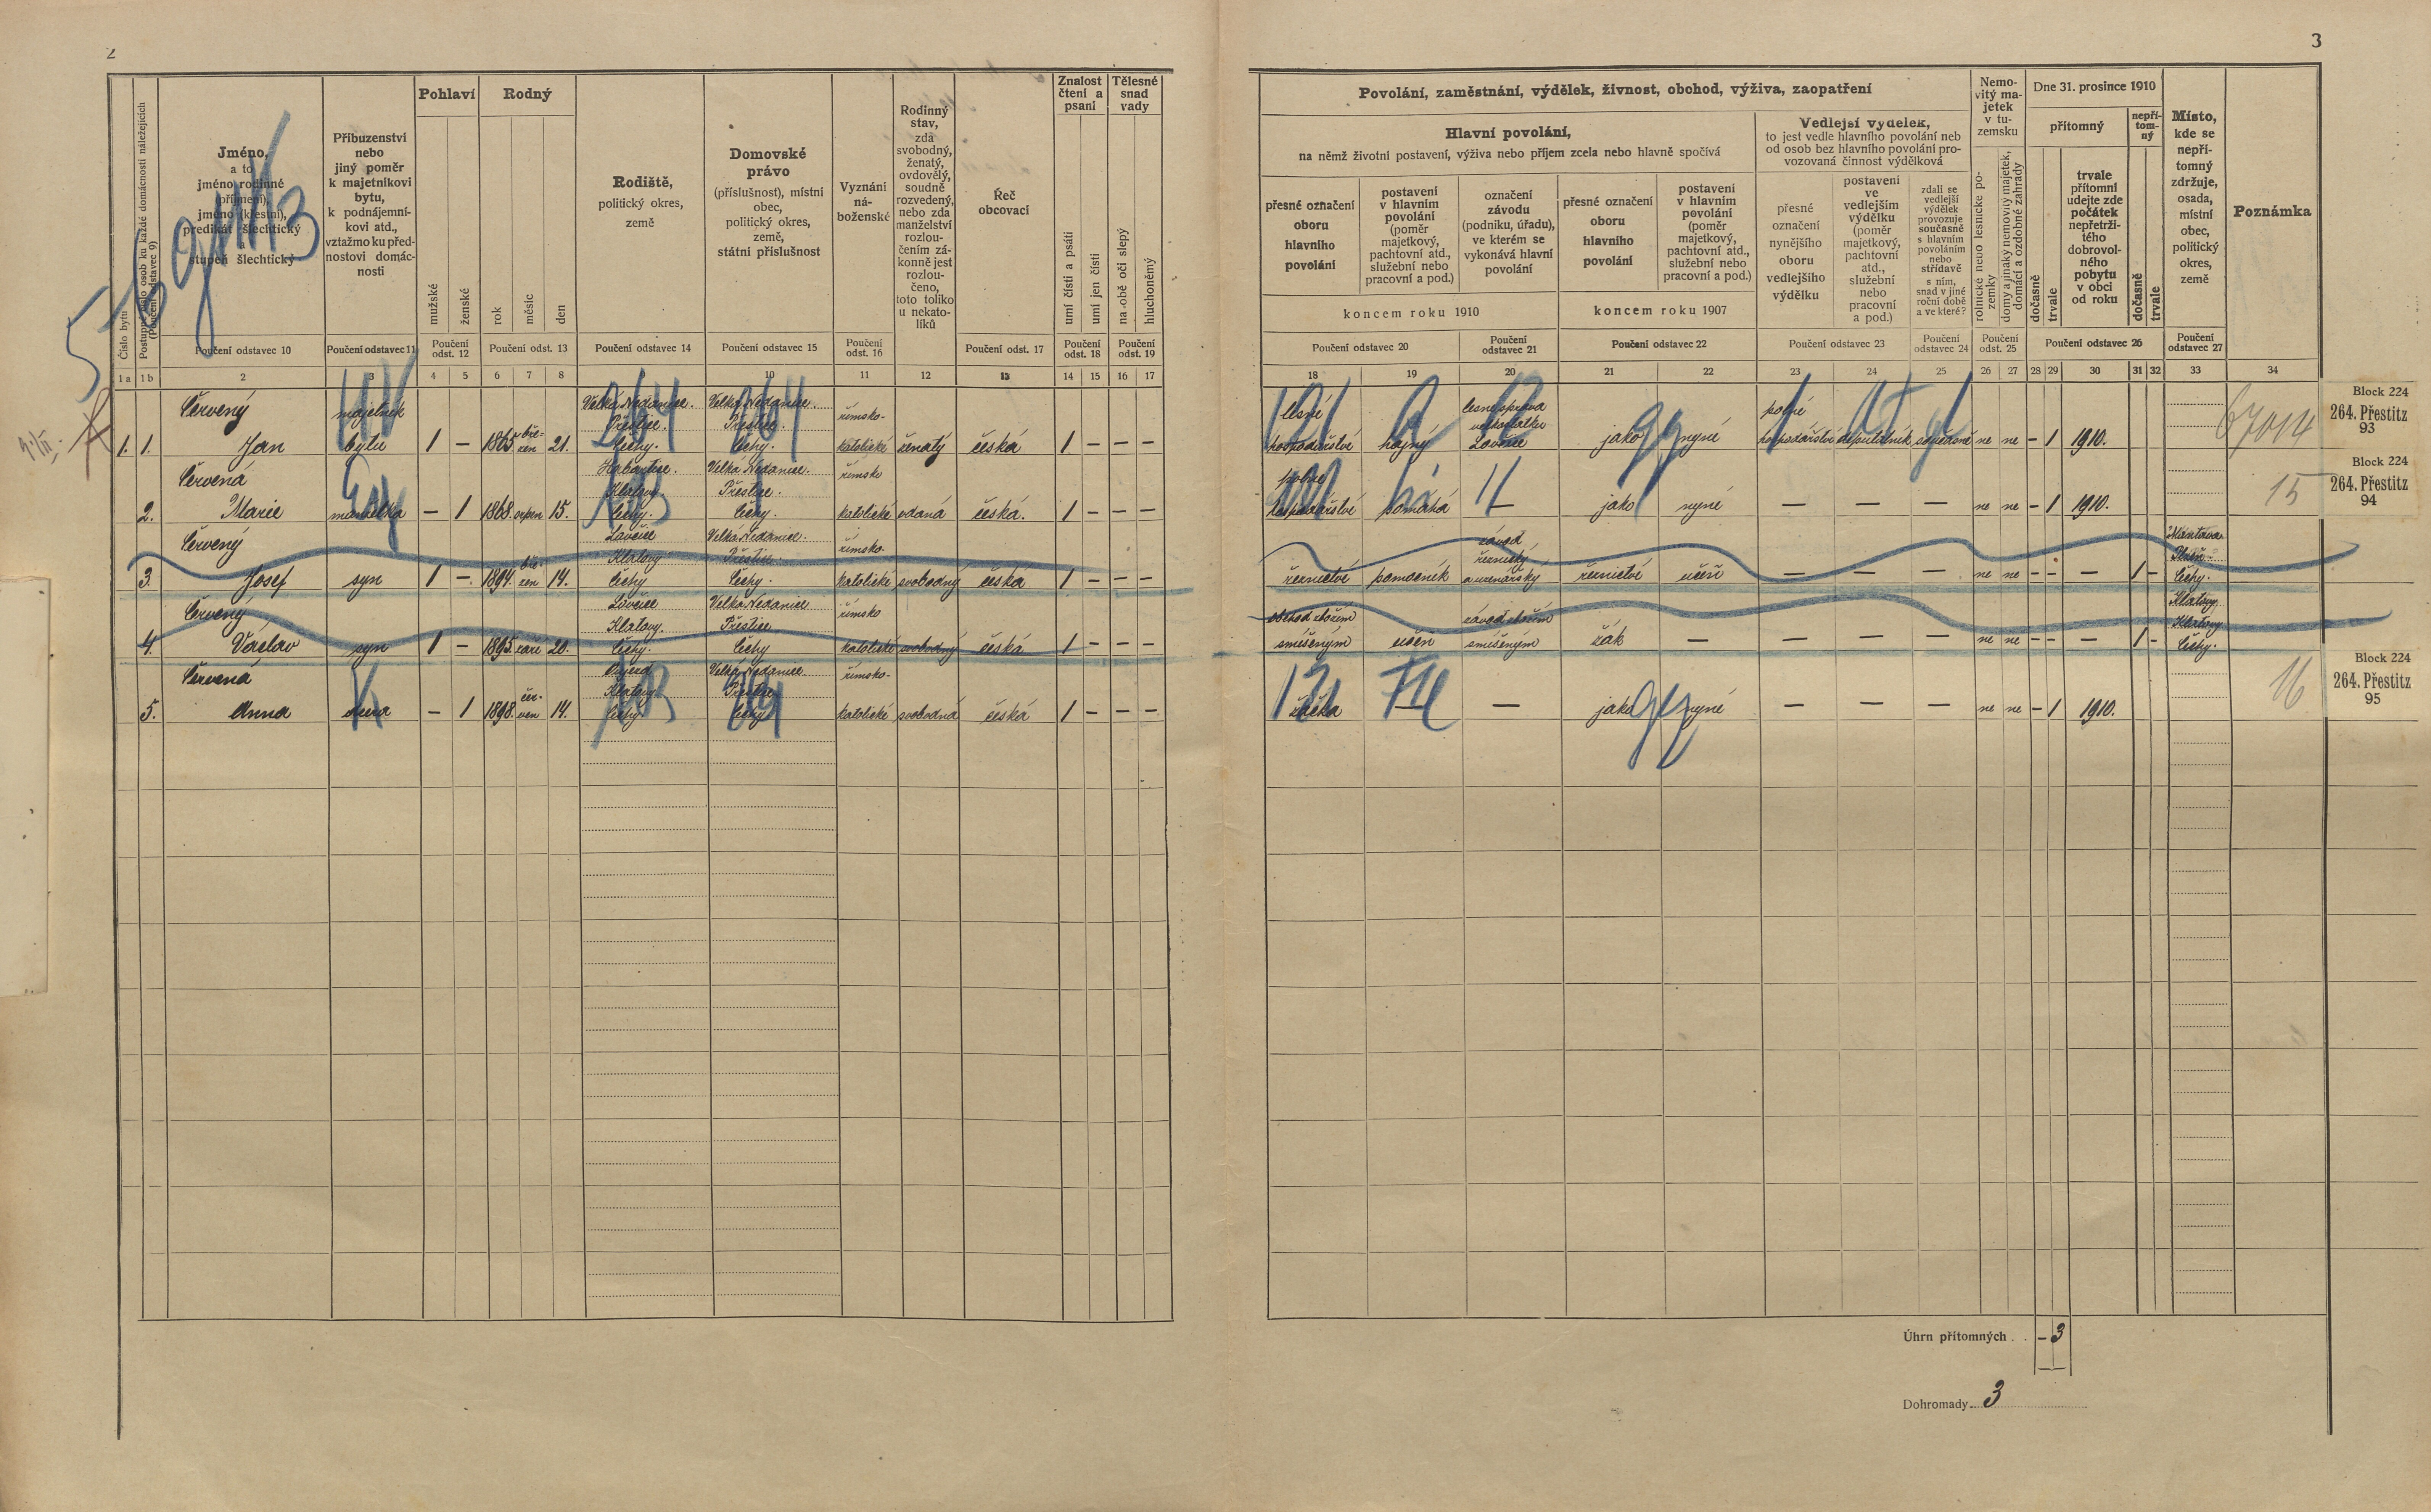 2. soap-kt_01159_census-1910-kvasetice-lovcice-cp012_0020